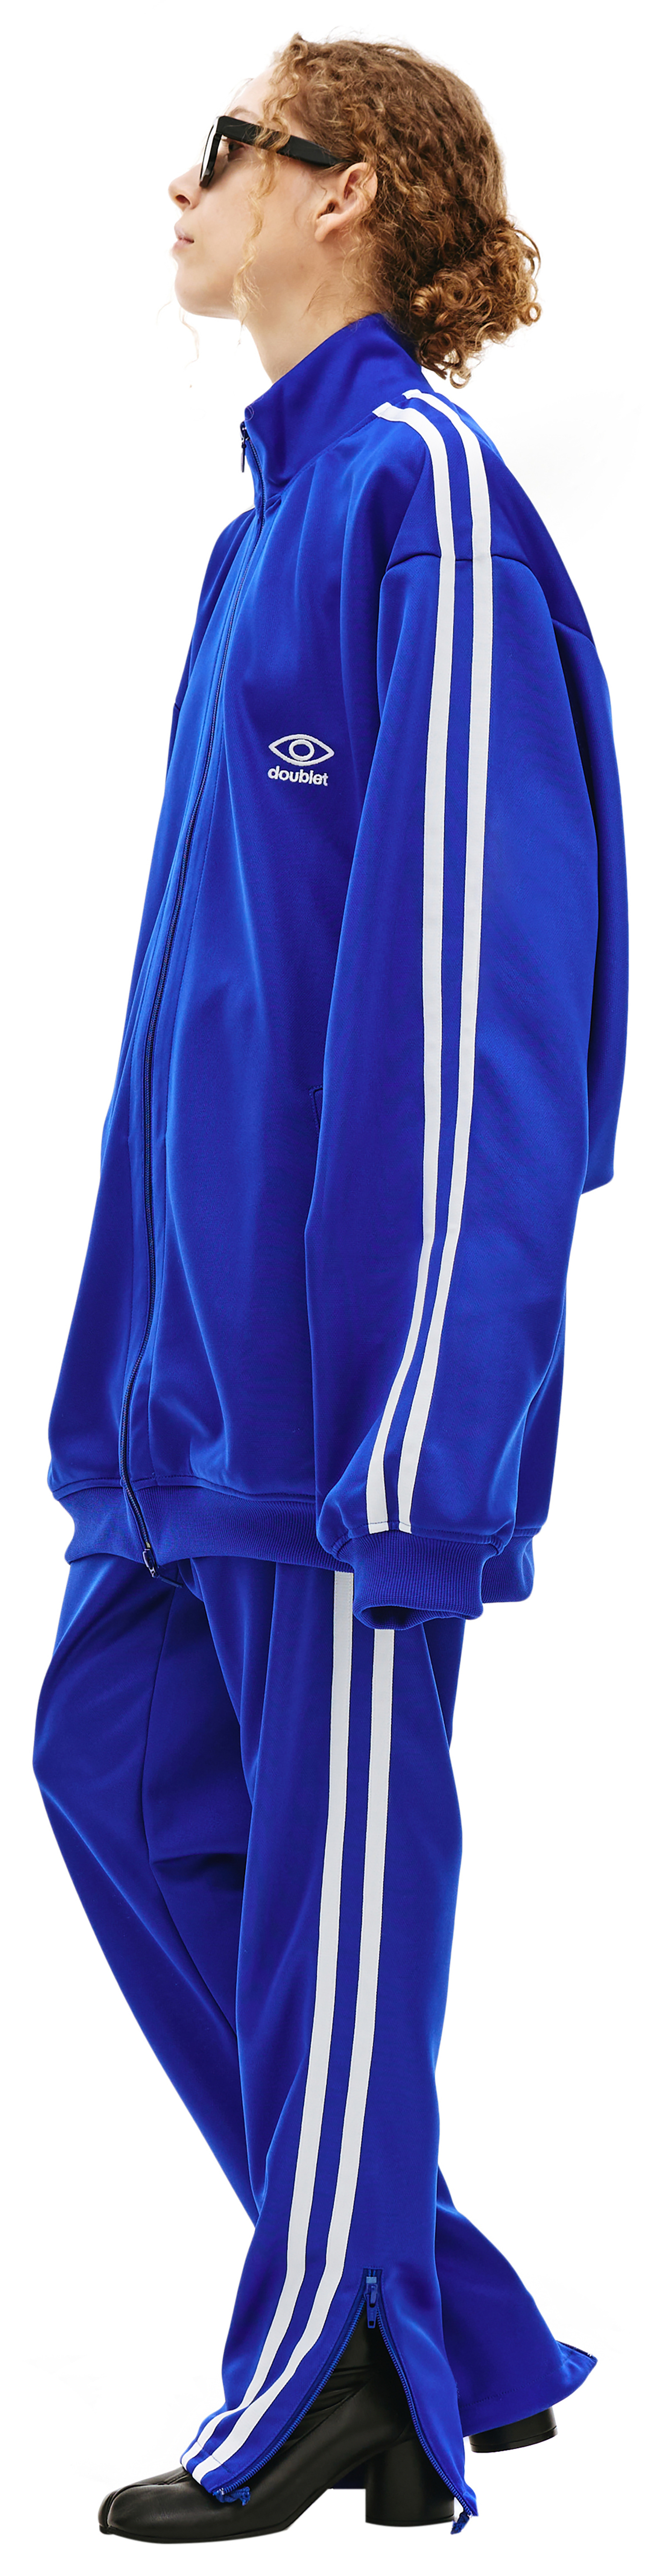 Buy Doublet women blue invisible track jacket for $590 online on